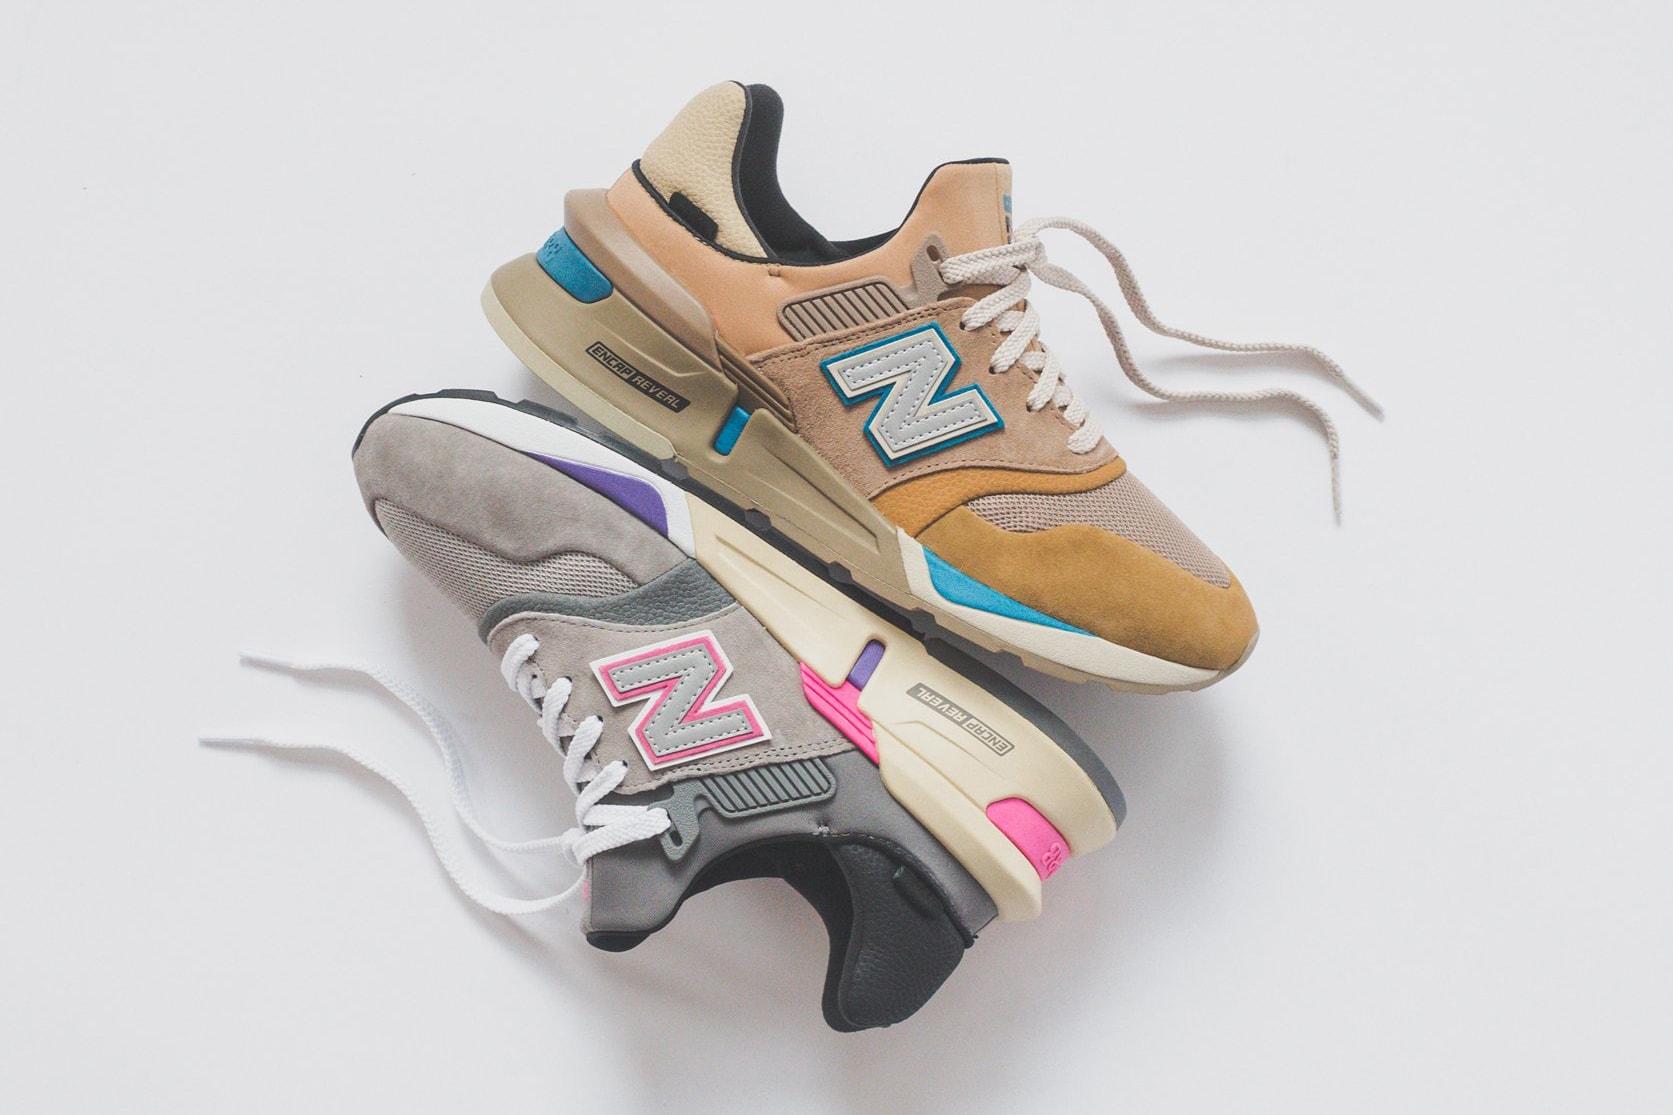 KITH New Balance United Arrows and Sons nonnative 2018 Collection